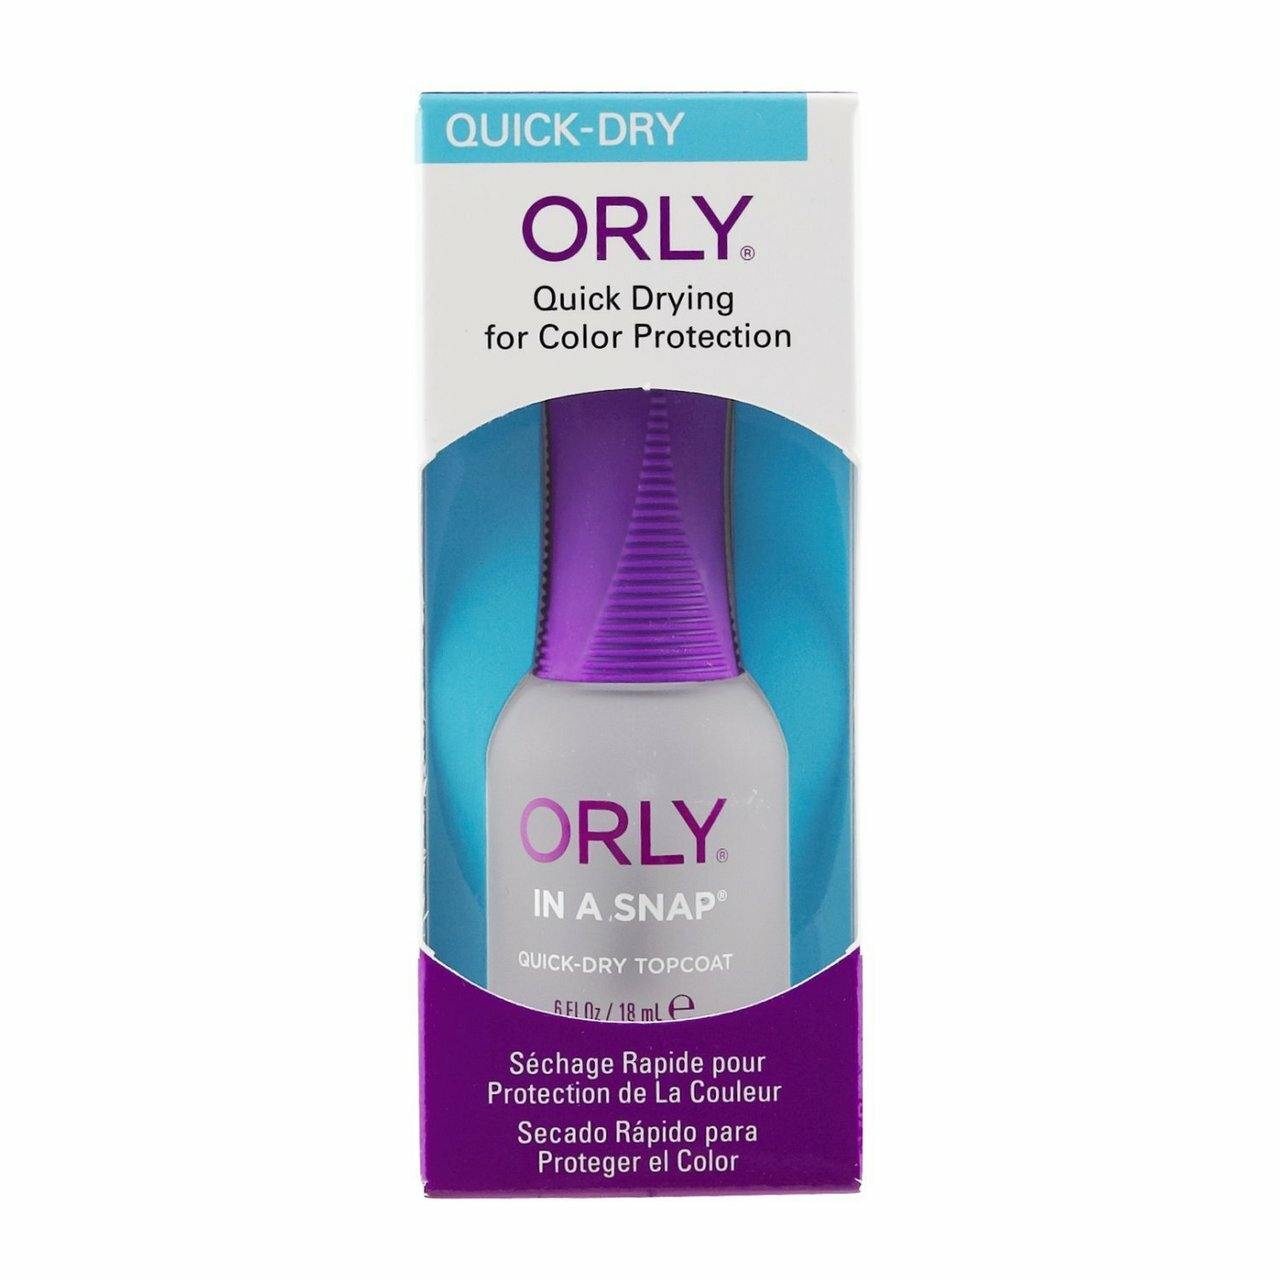 Orly Nail Dryer, In-A-Snap, 0.6 Ounce - Sanida Beauty